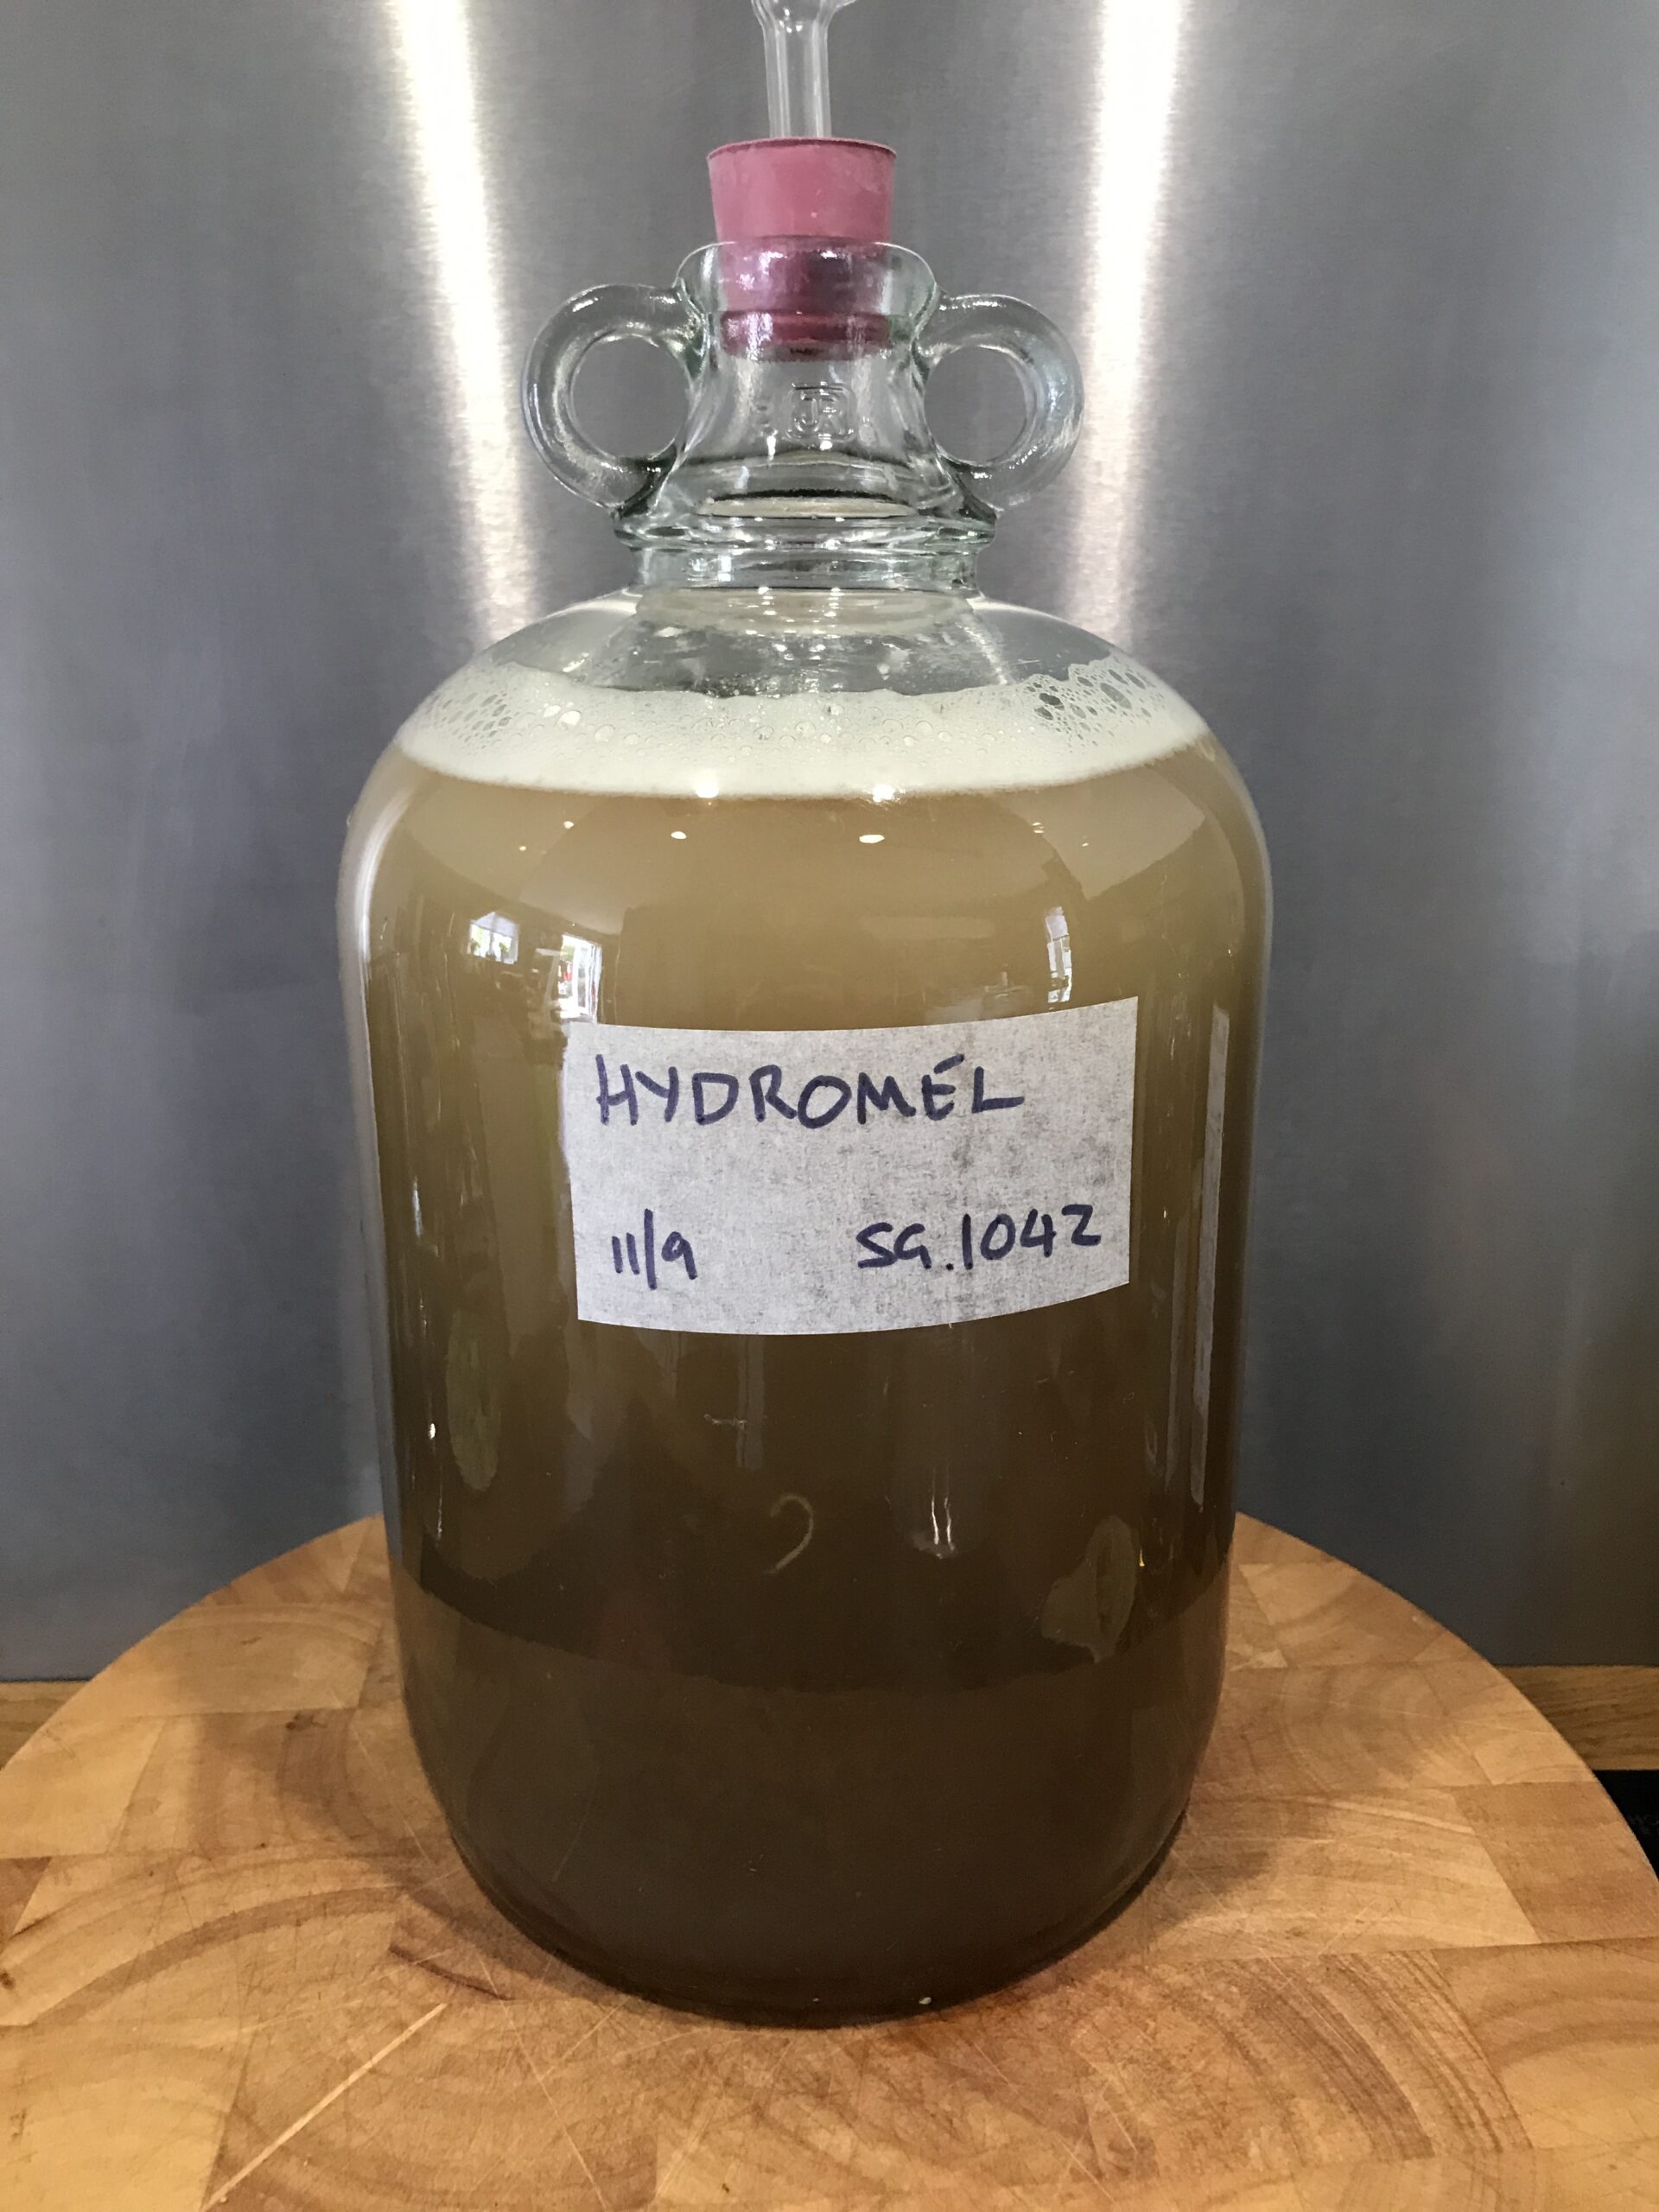 What Is Hydromel?